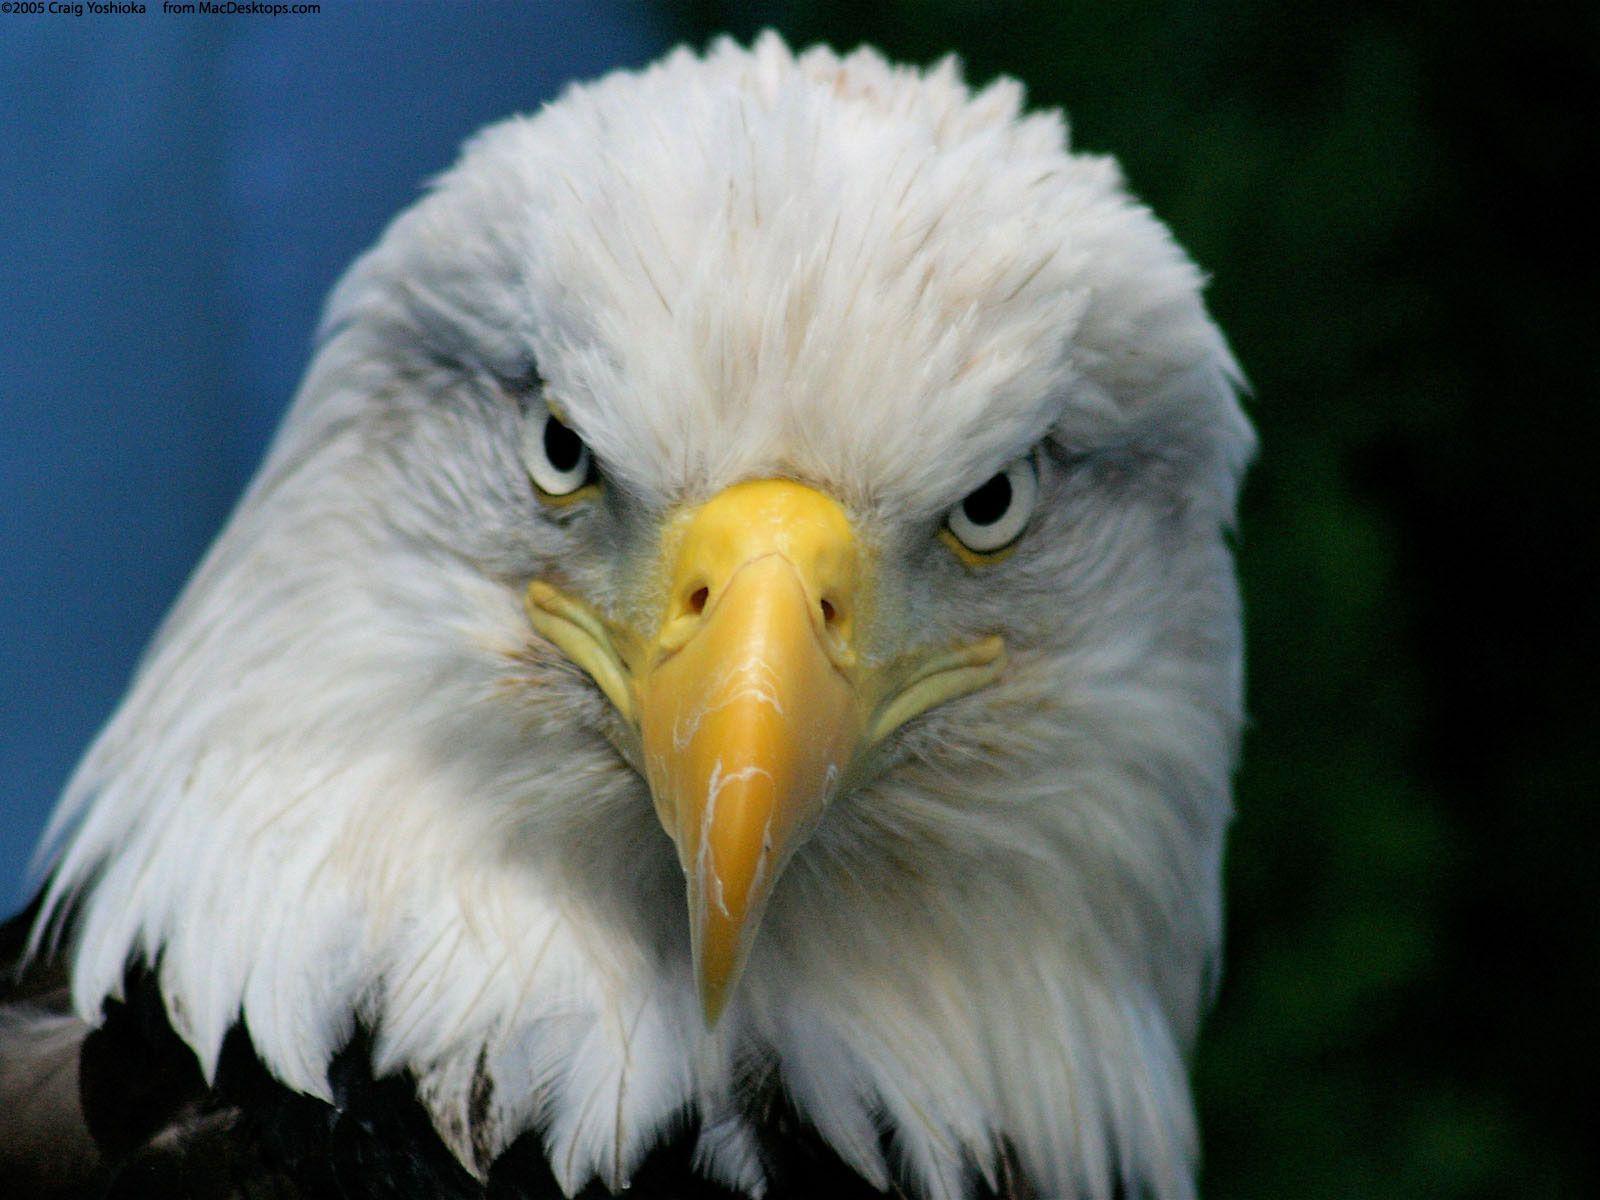 The Face Of Bald Eagle Wallpaper 2724 High Resolution. download